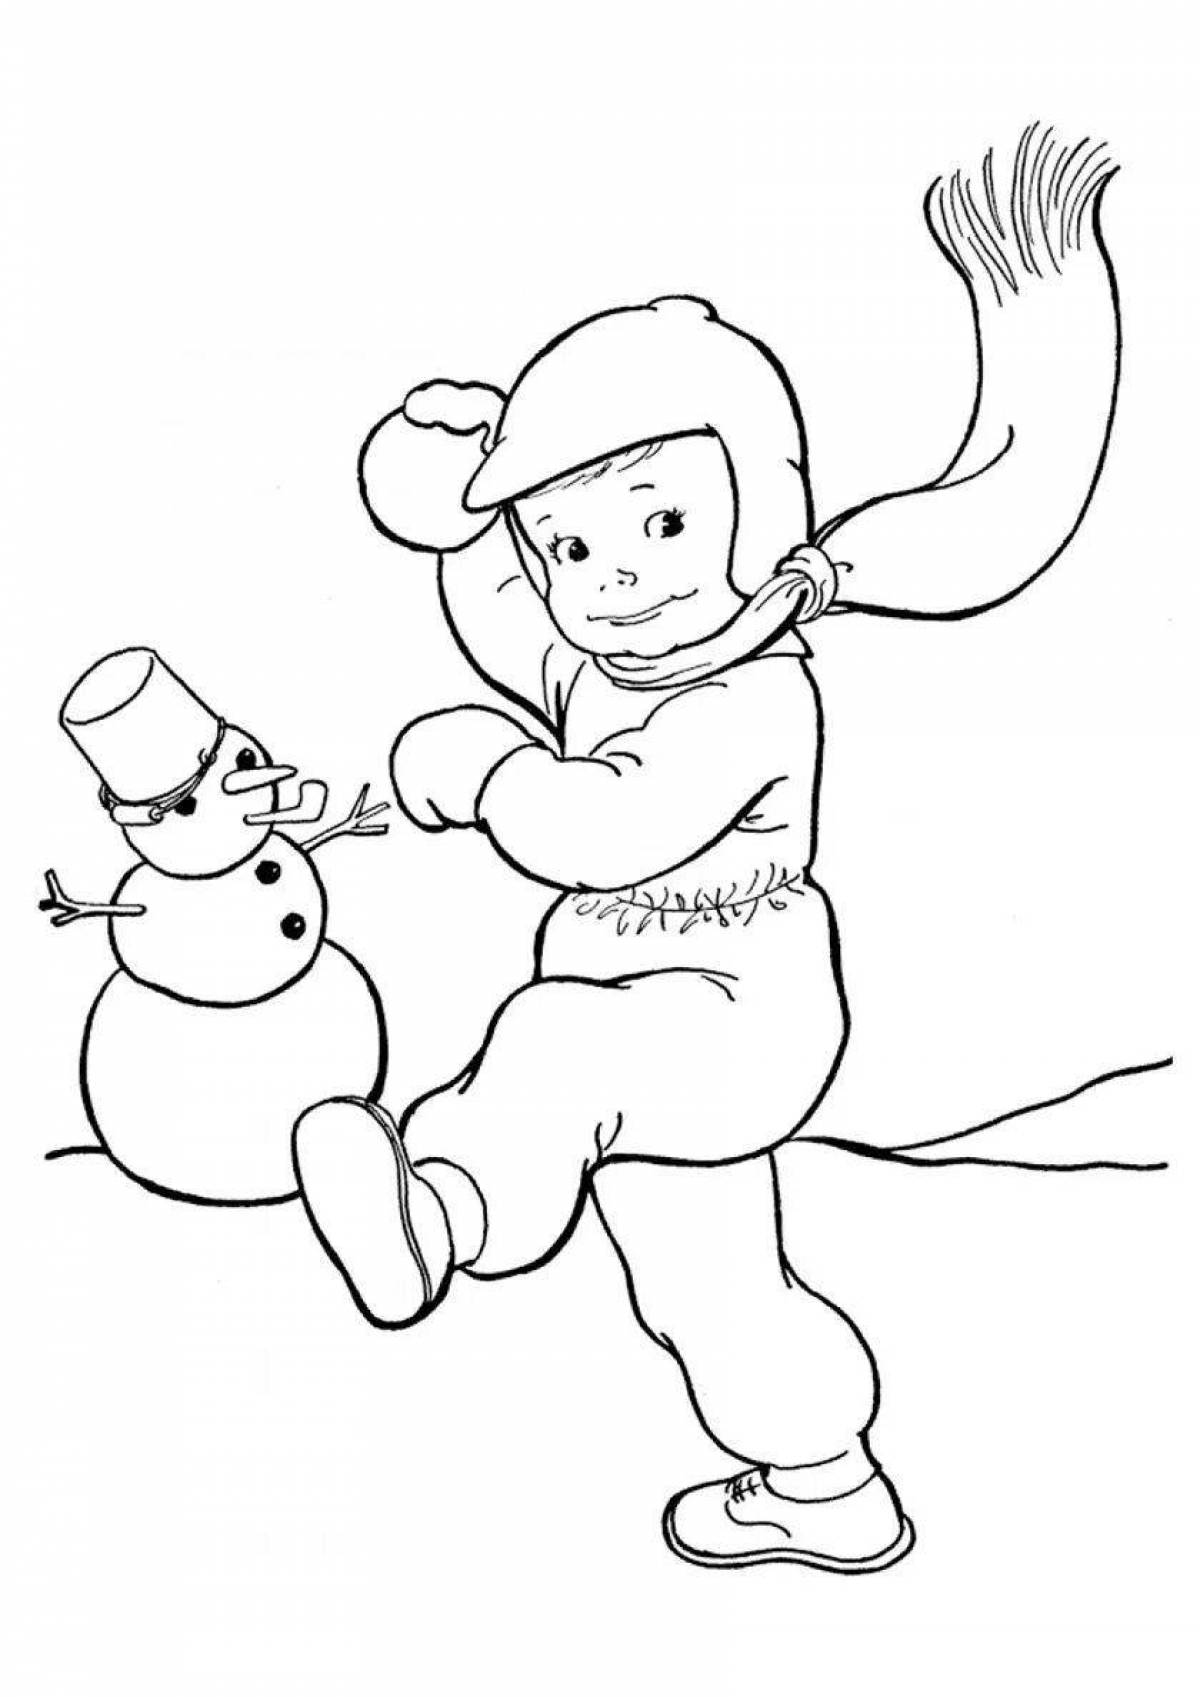 Coloring book children playing snowballs